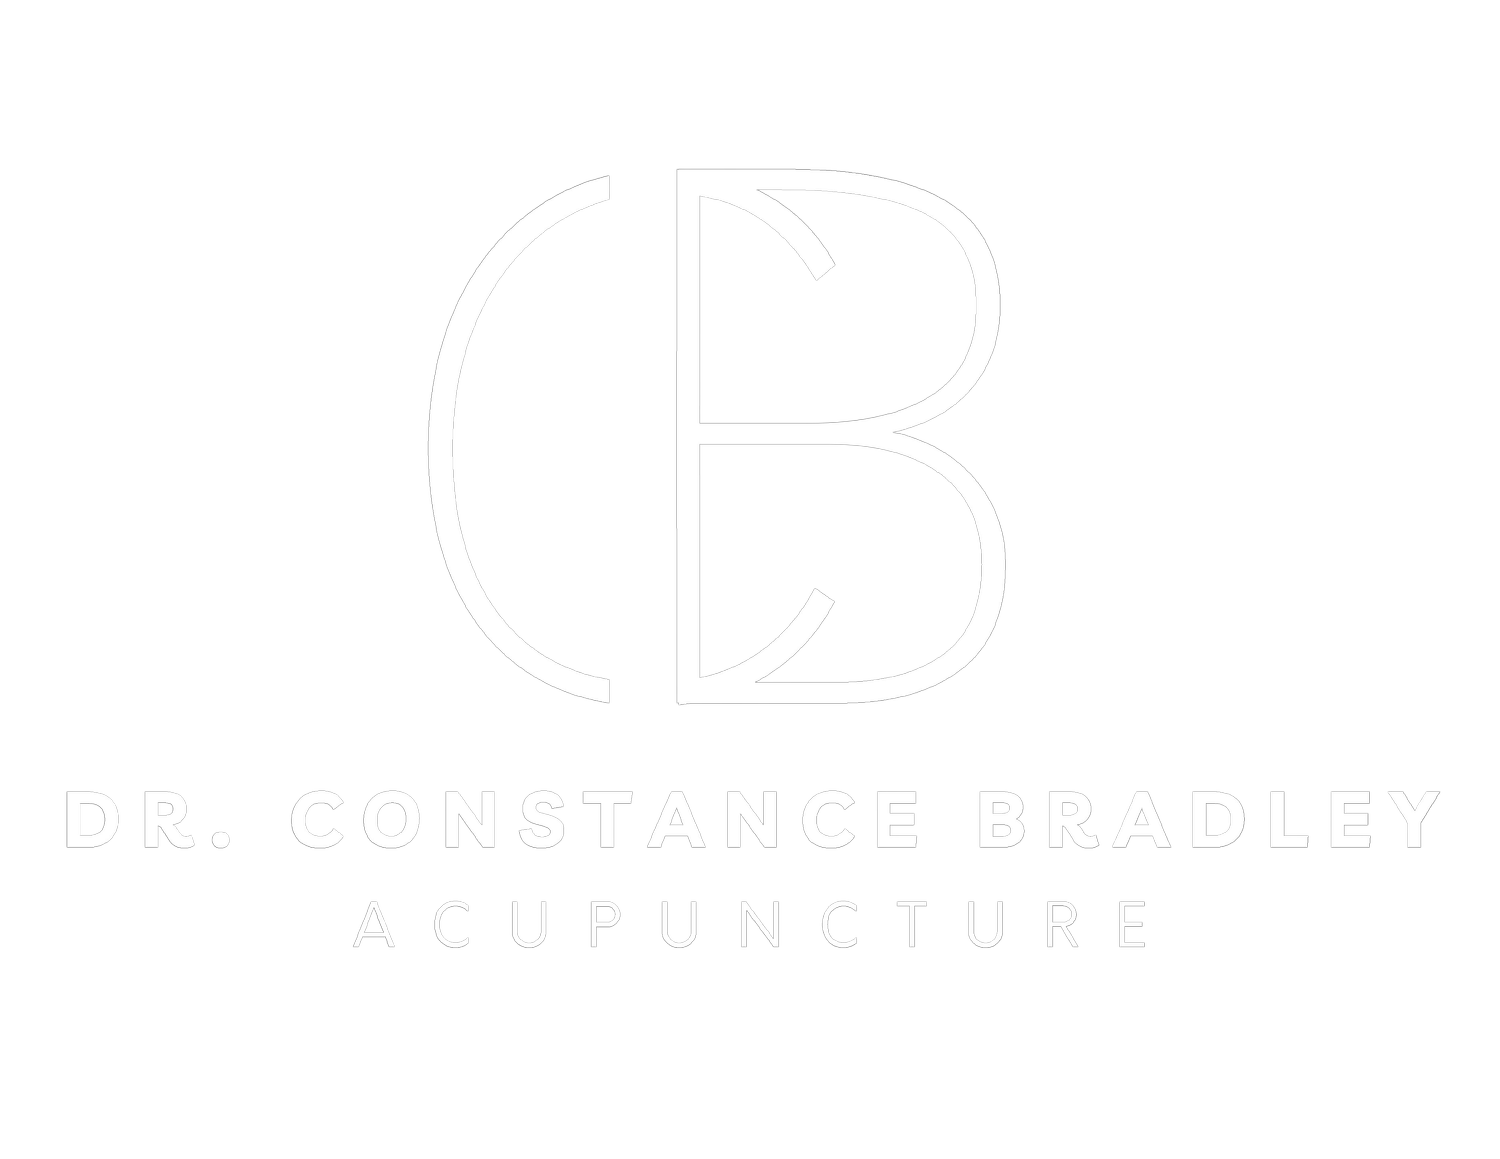 Dr. Constance Bradley Acupuncture and Wellness